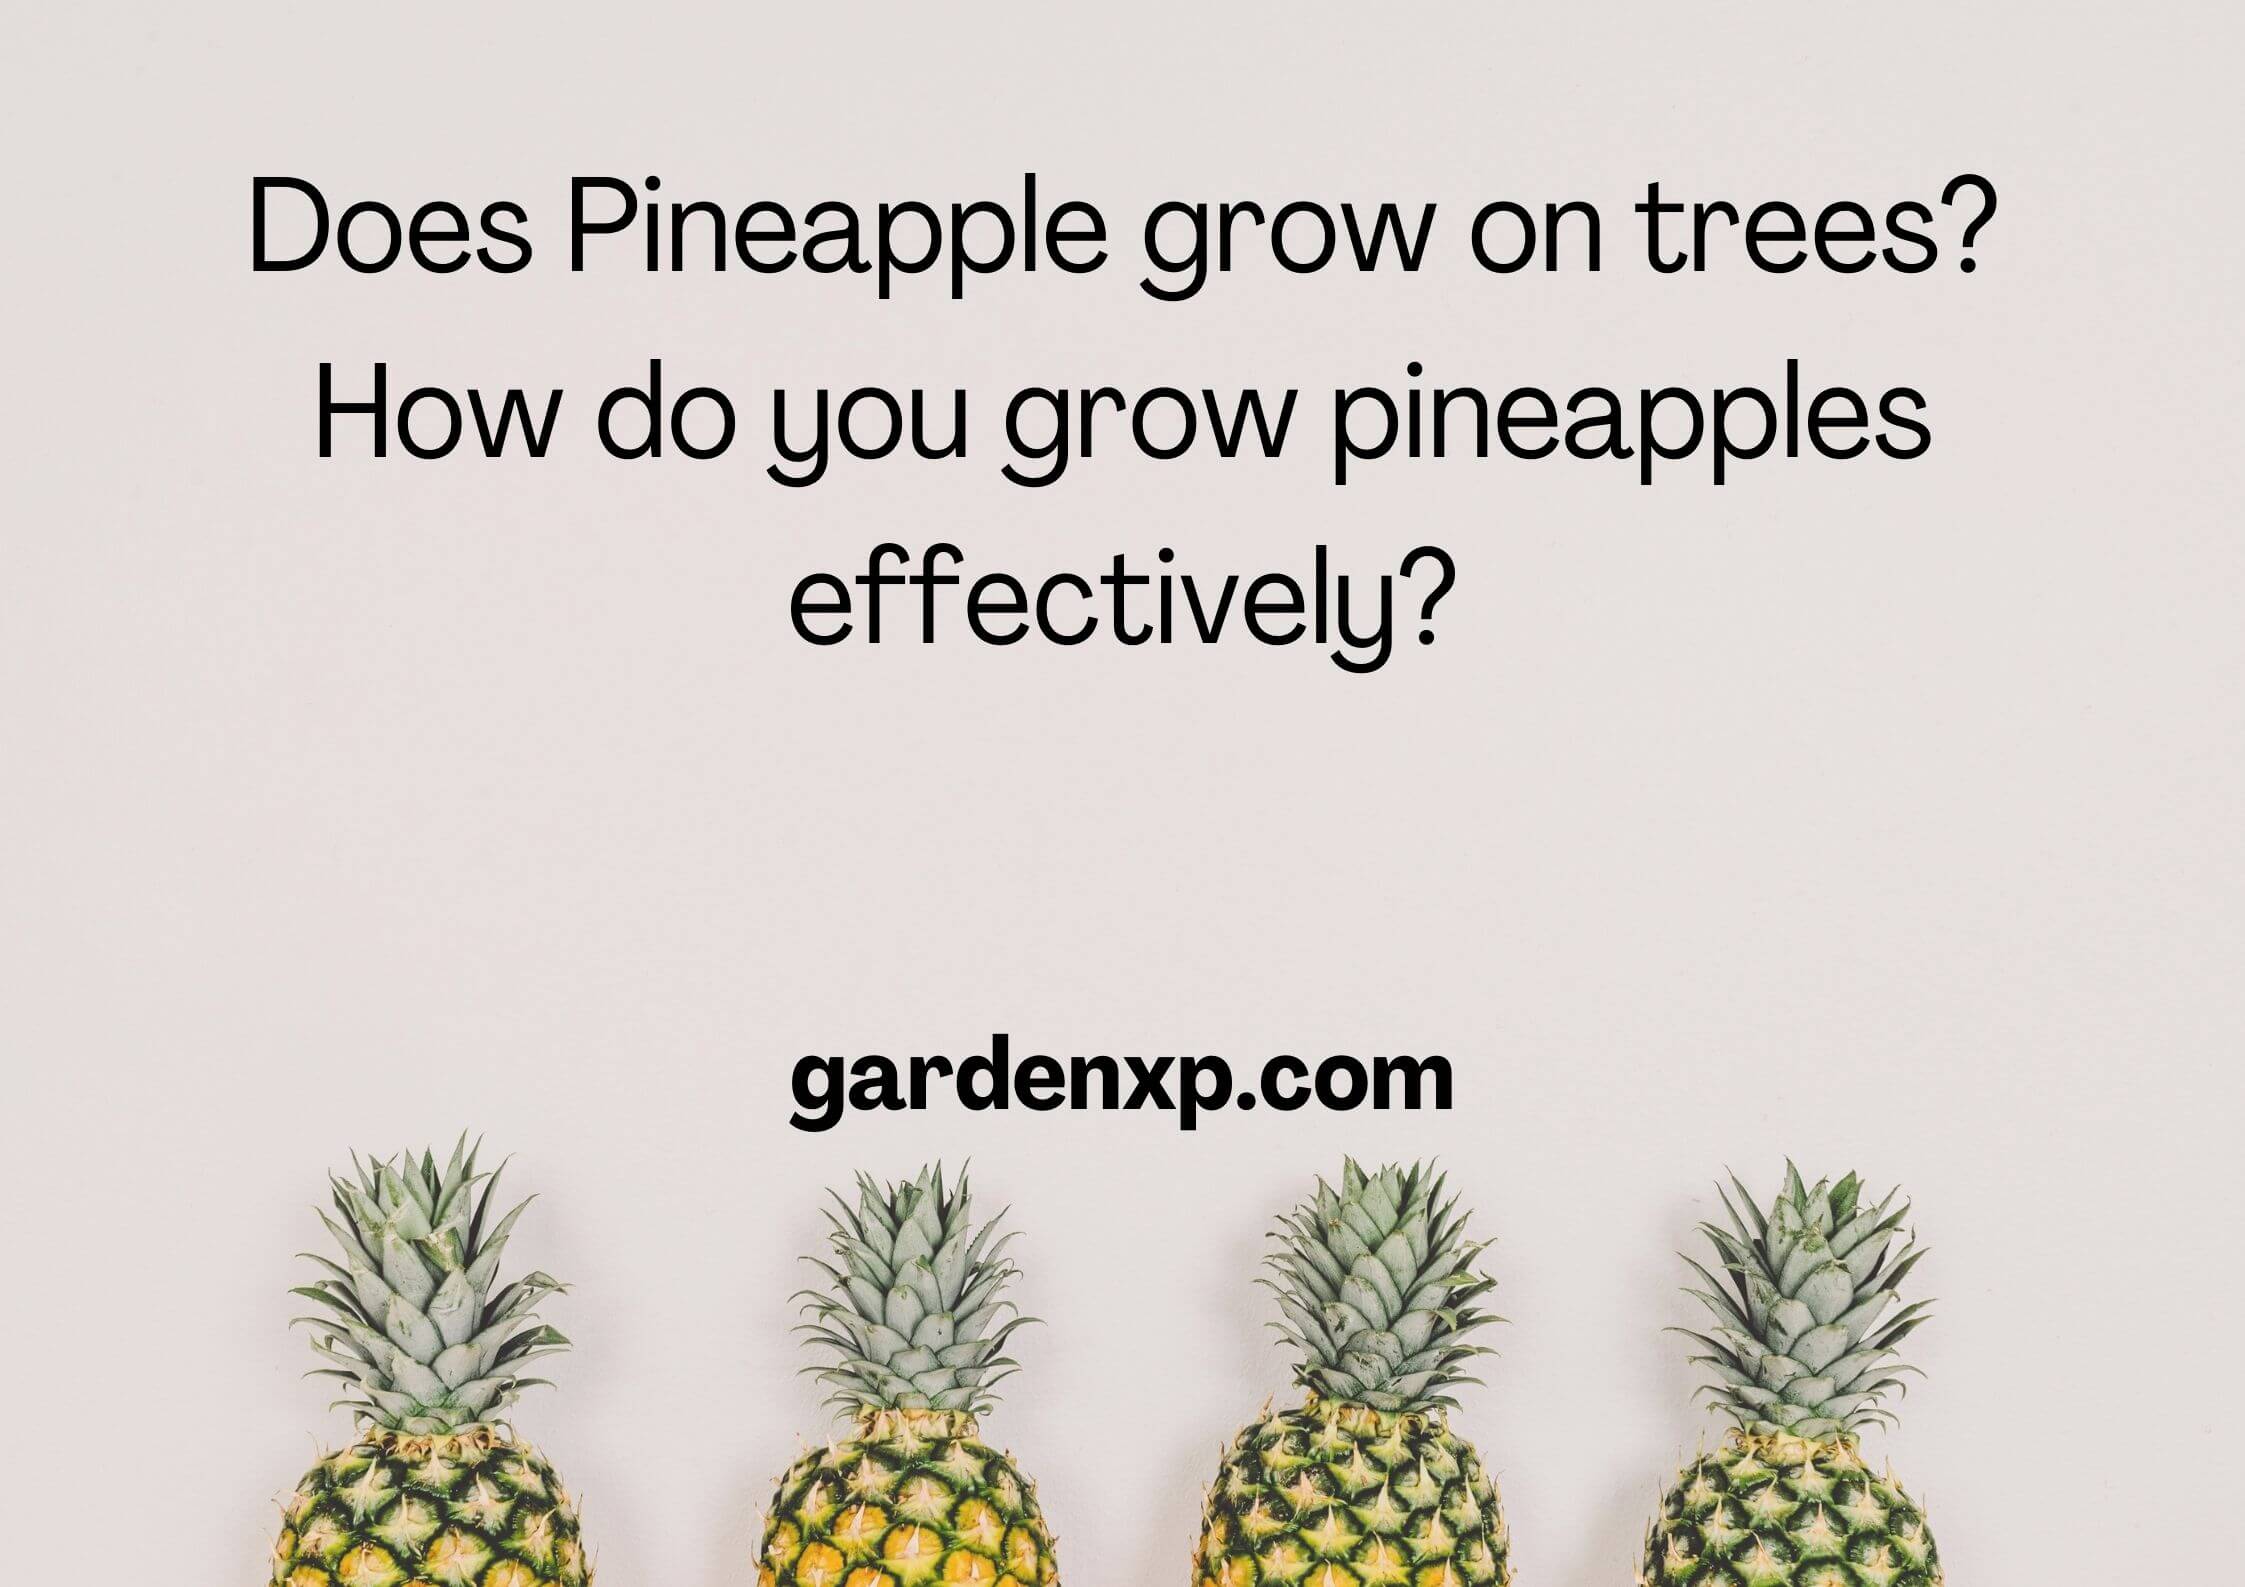 What do Pineapples Grow on? Do Pineapples grow on trees? How do you grow pineapples effectively?